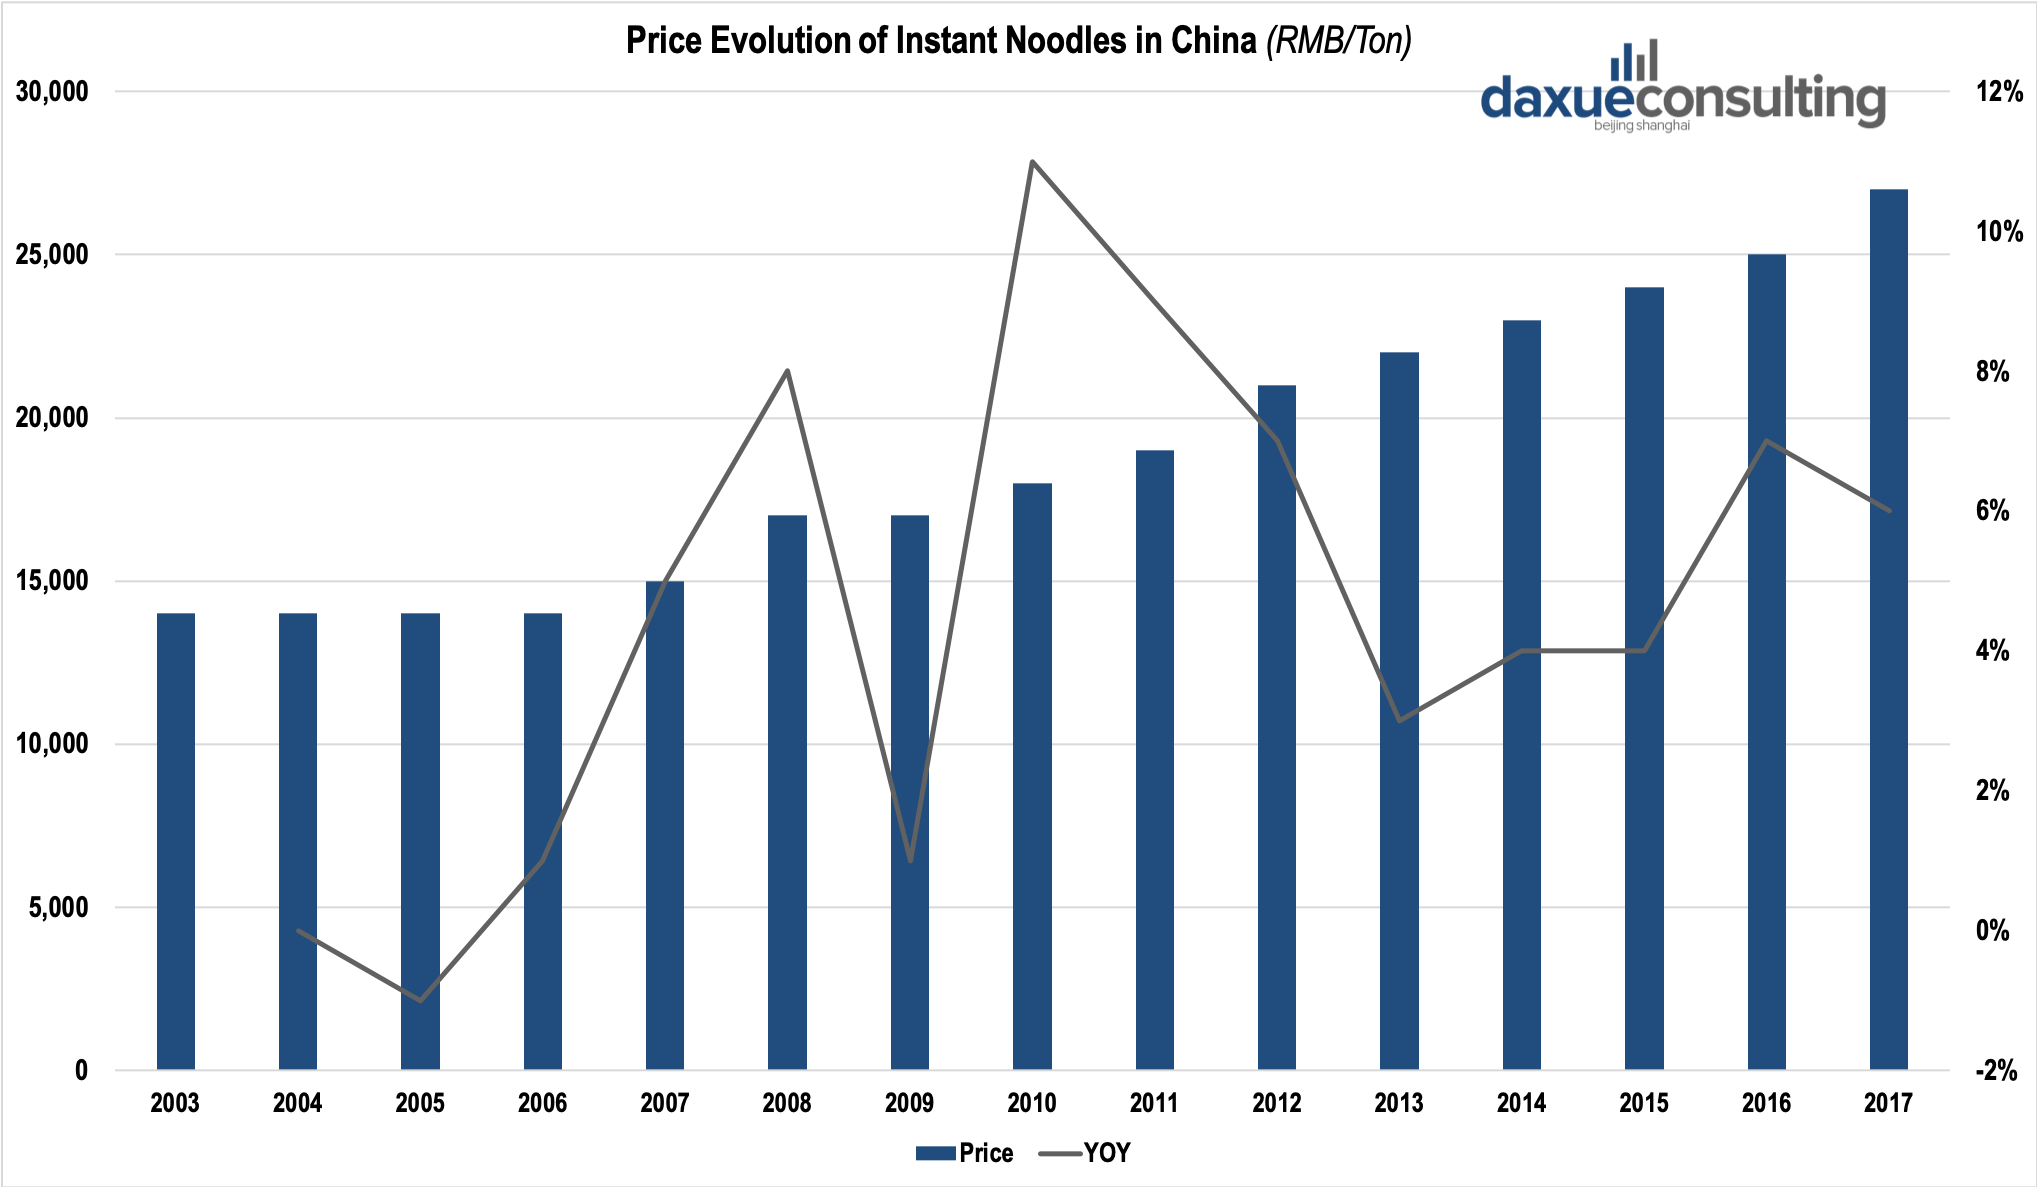 Price Evolution of Instant Noodles in China